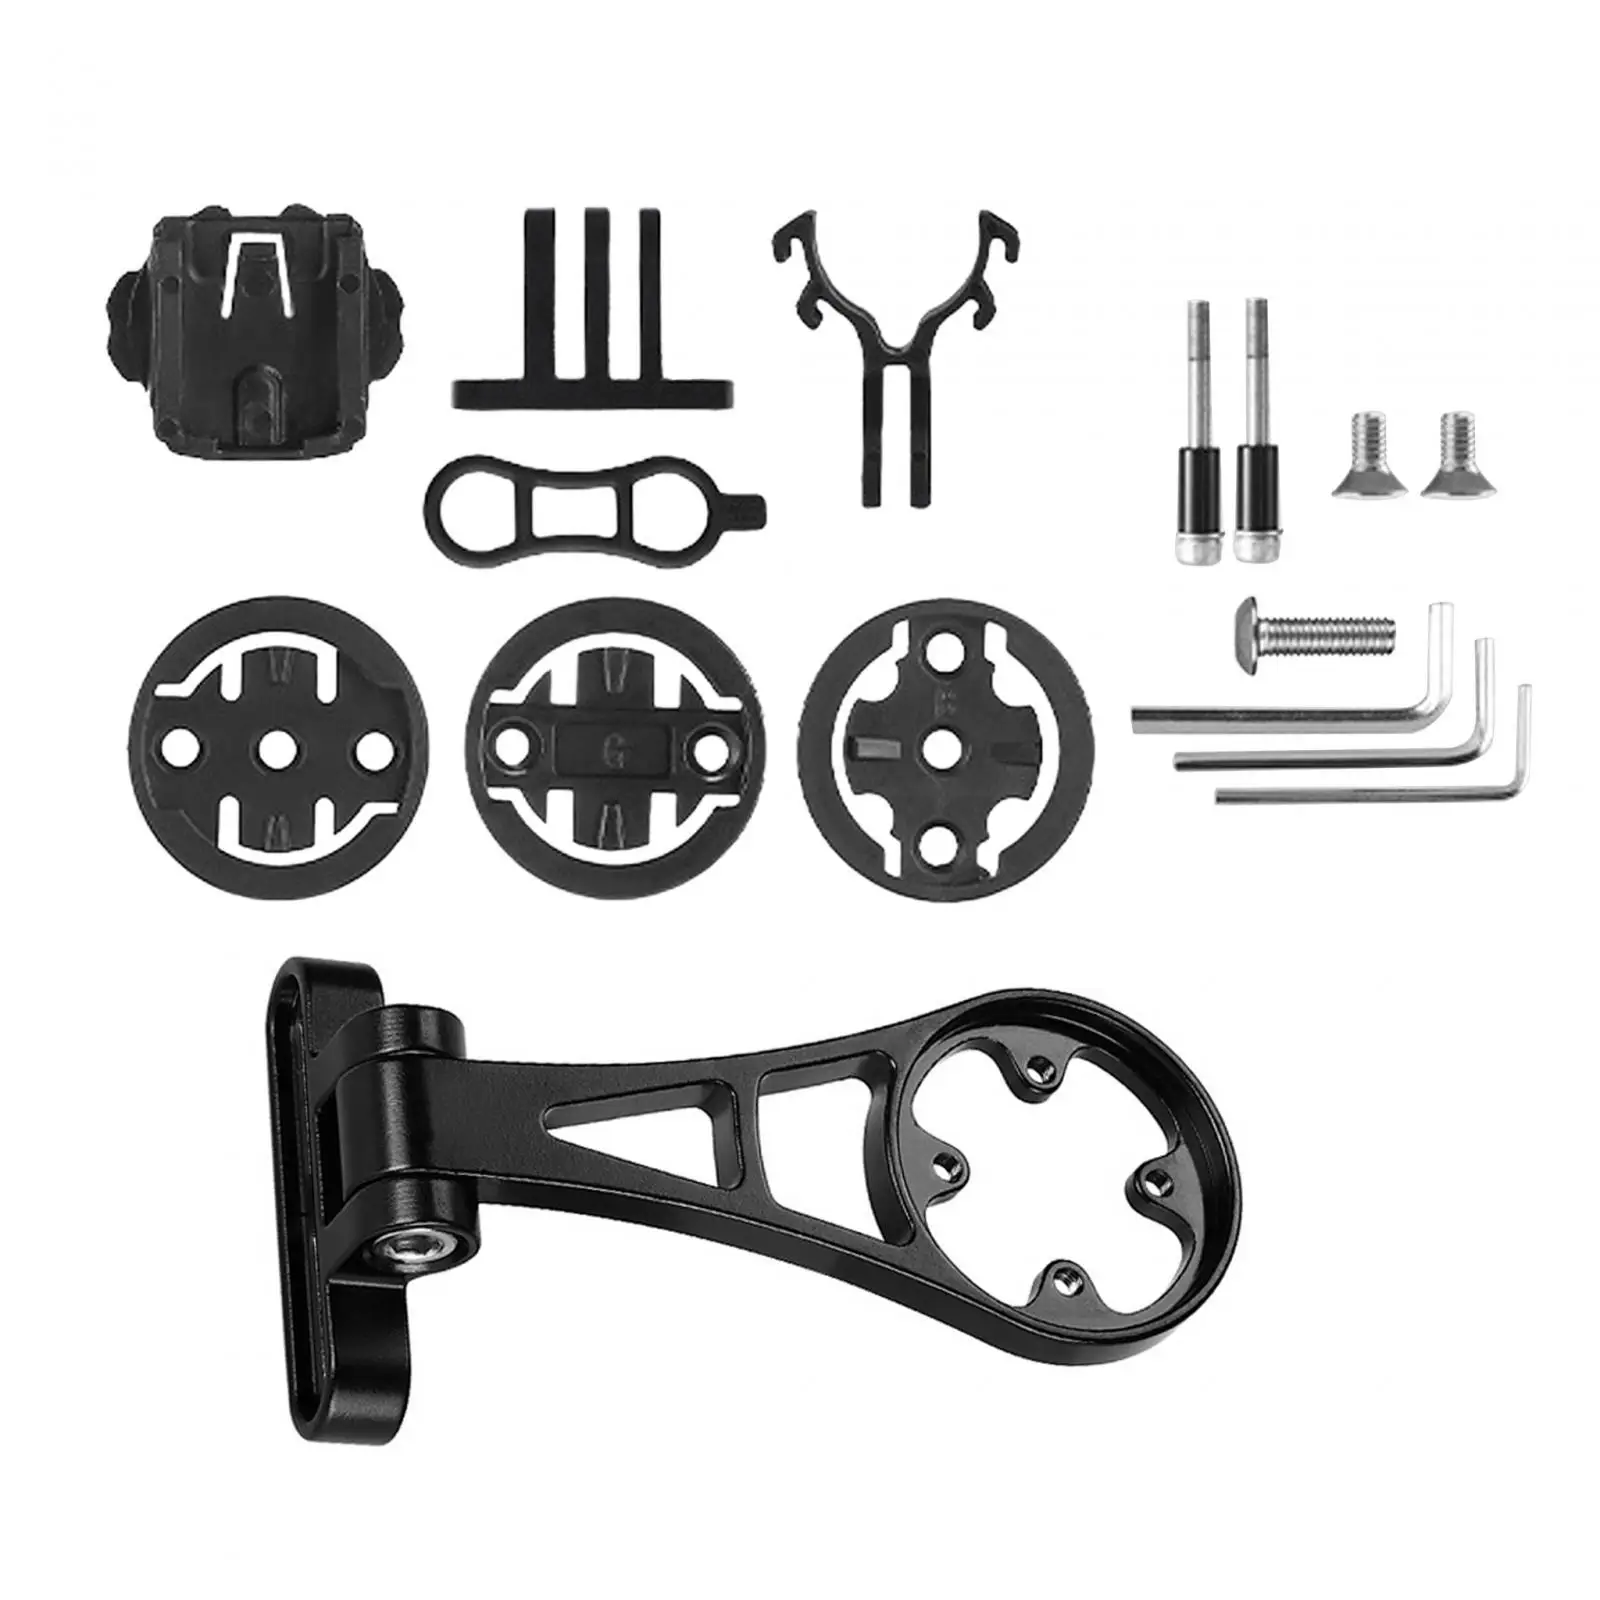 Bike Computer Mount Extended Mount Cycling Accessories Bicycle Stem Handlebar Mount Speed Meter Holder Action Camera Holder